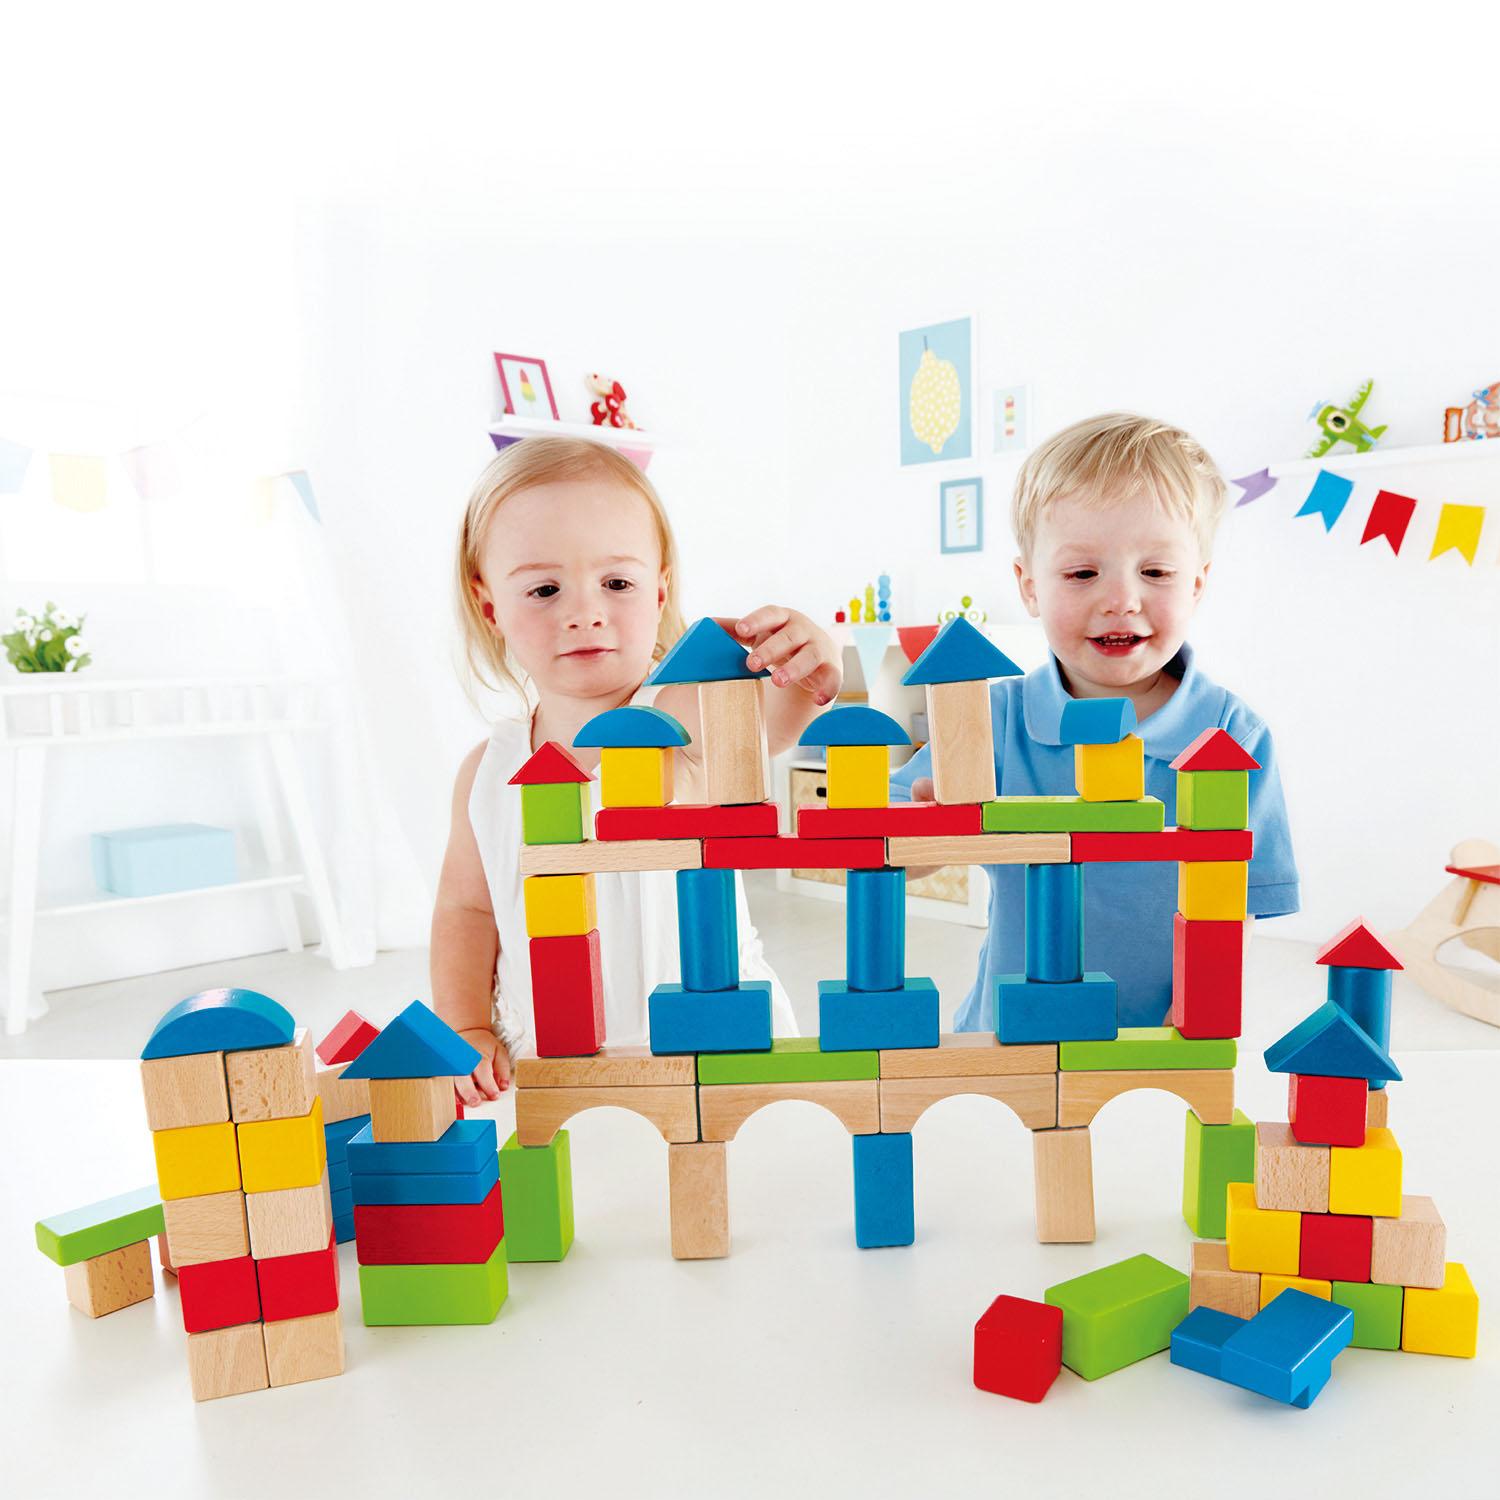 2 children placing wooden blocks on the structure in front of them. White back and foreground.